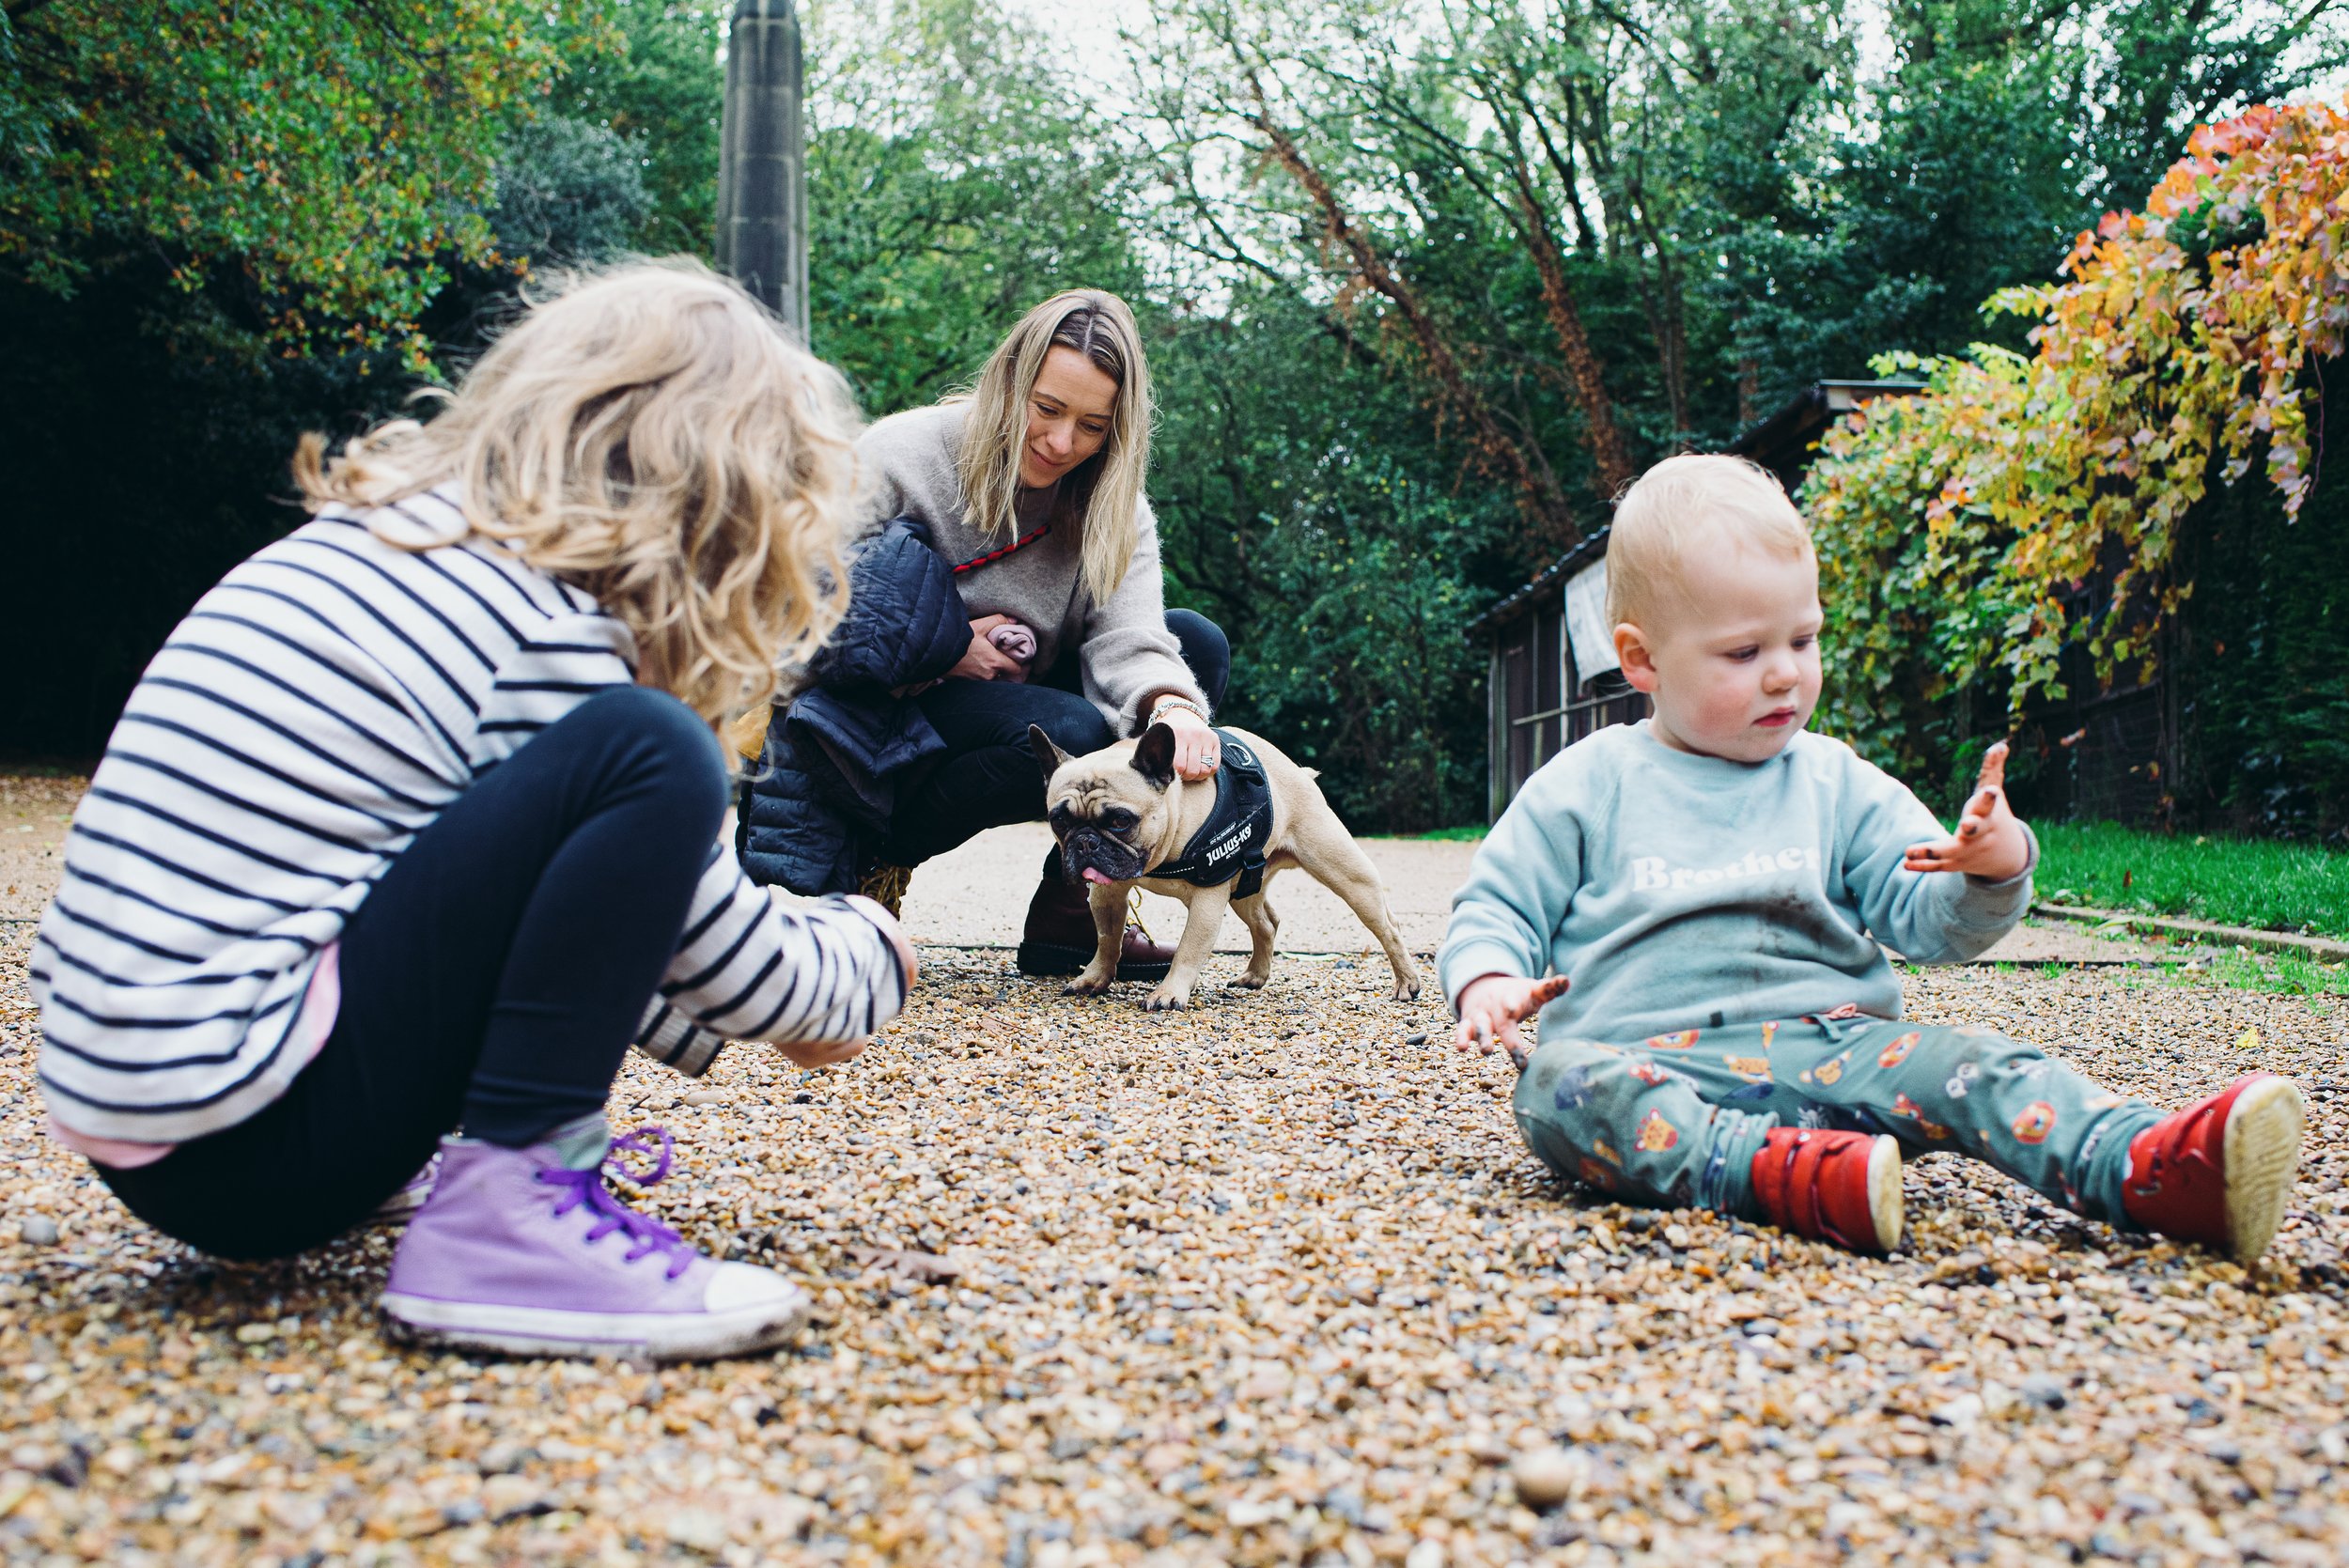 mother-children-dulwich-family-photography-unposed-dog-outdoor-family-photoshoot-nunhead-cemetery.jpg